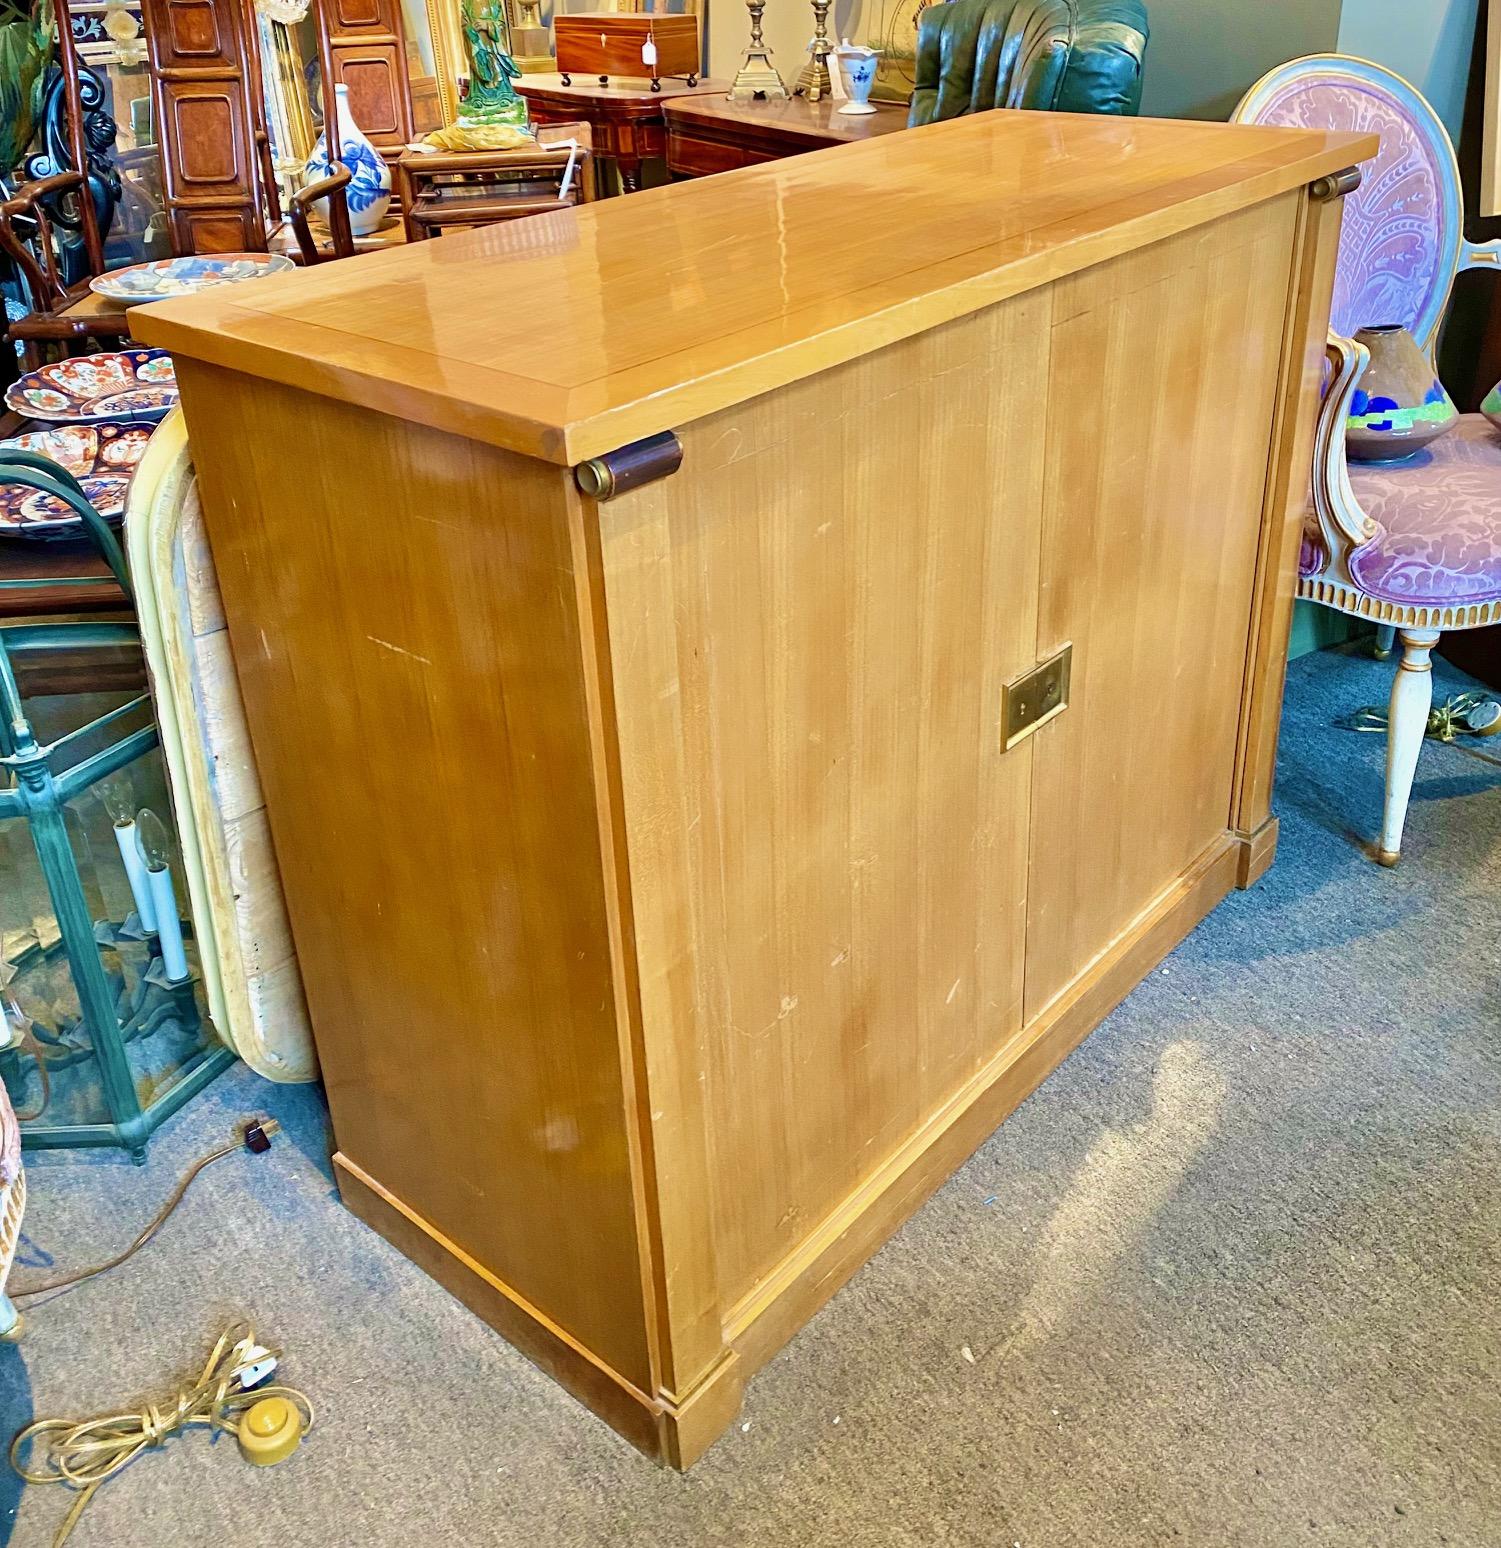 Art Deco classical cherrywood cabinet by Maurice Rinck with two doors revealing a compartmentalized interior in sycamore. Keyhole and finishes in gilded brass.
Stamped 